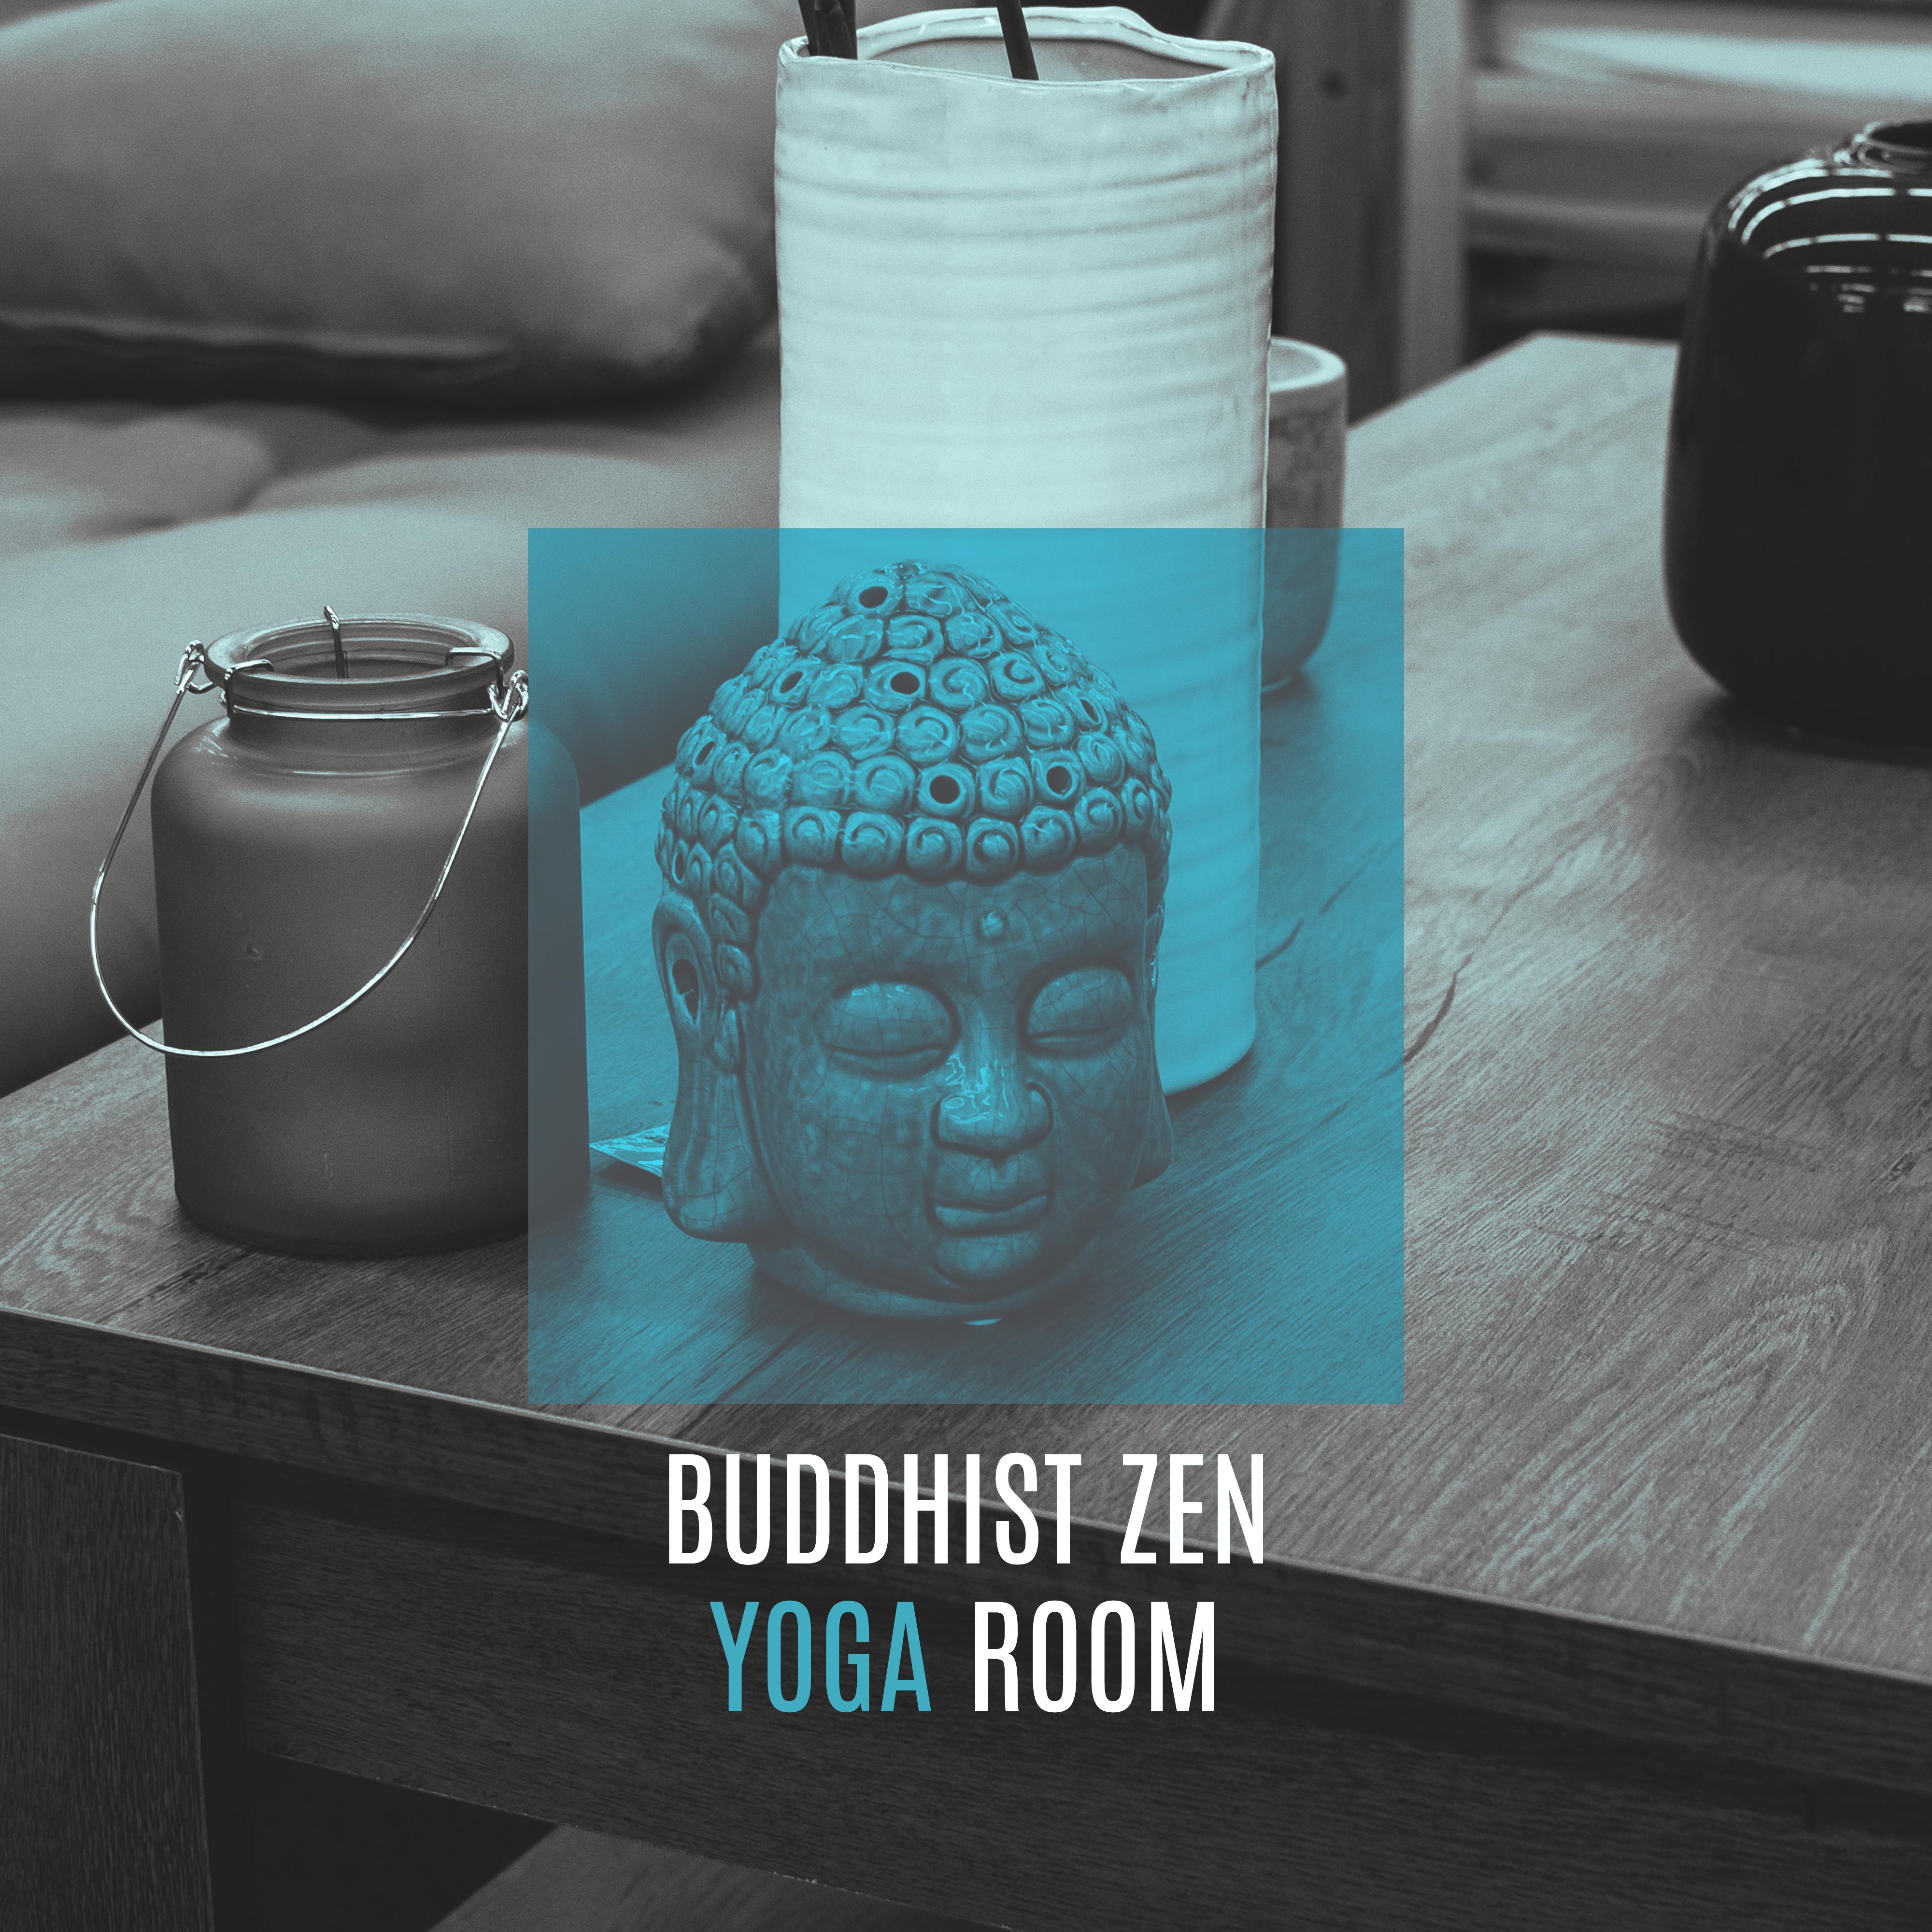 Buddhist Zen Yoga Room: 2019 New Age Ambient Music for Deep Meditation & Relaxation, Body & Soul Connection, Chakra Balance, Contemplation Songs